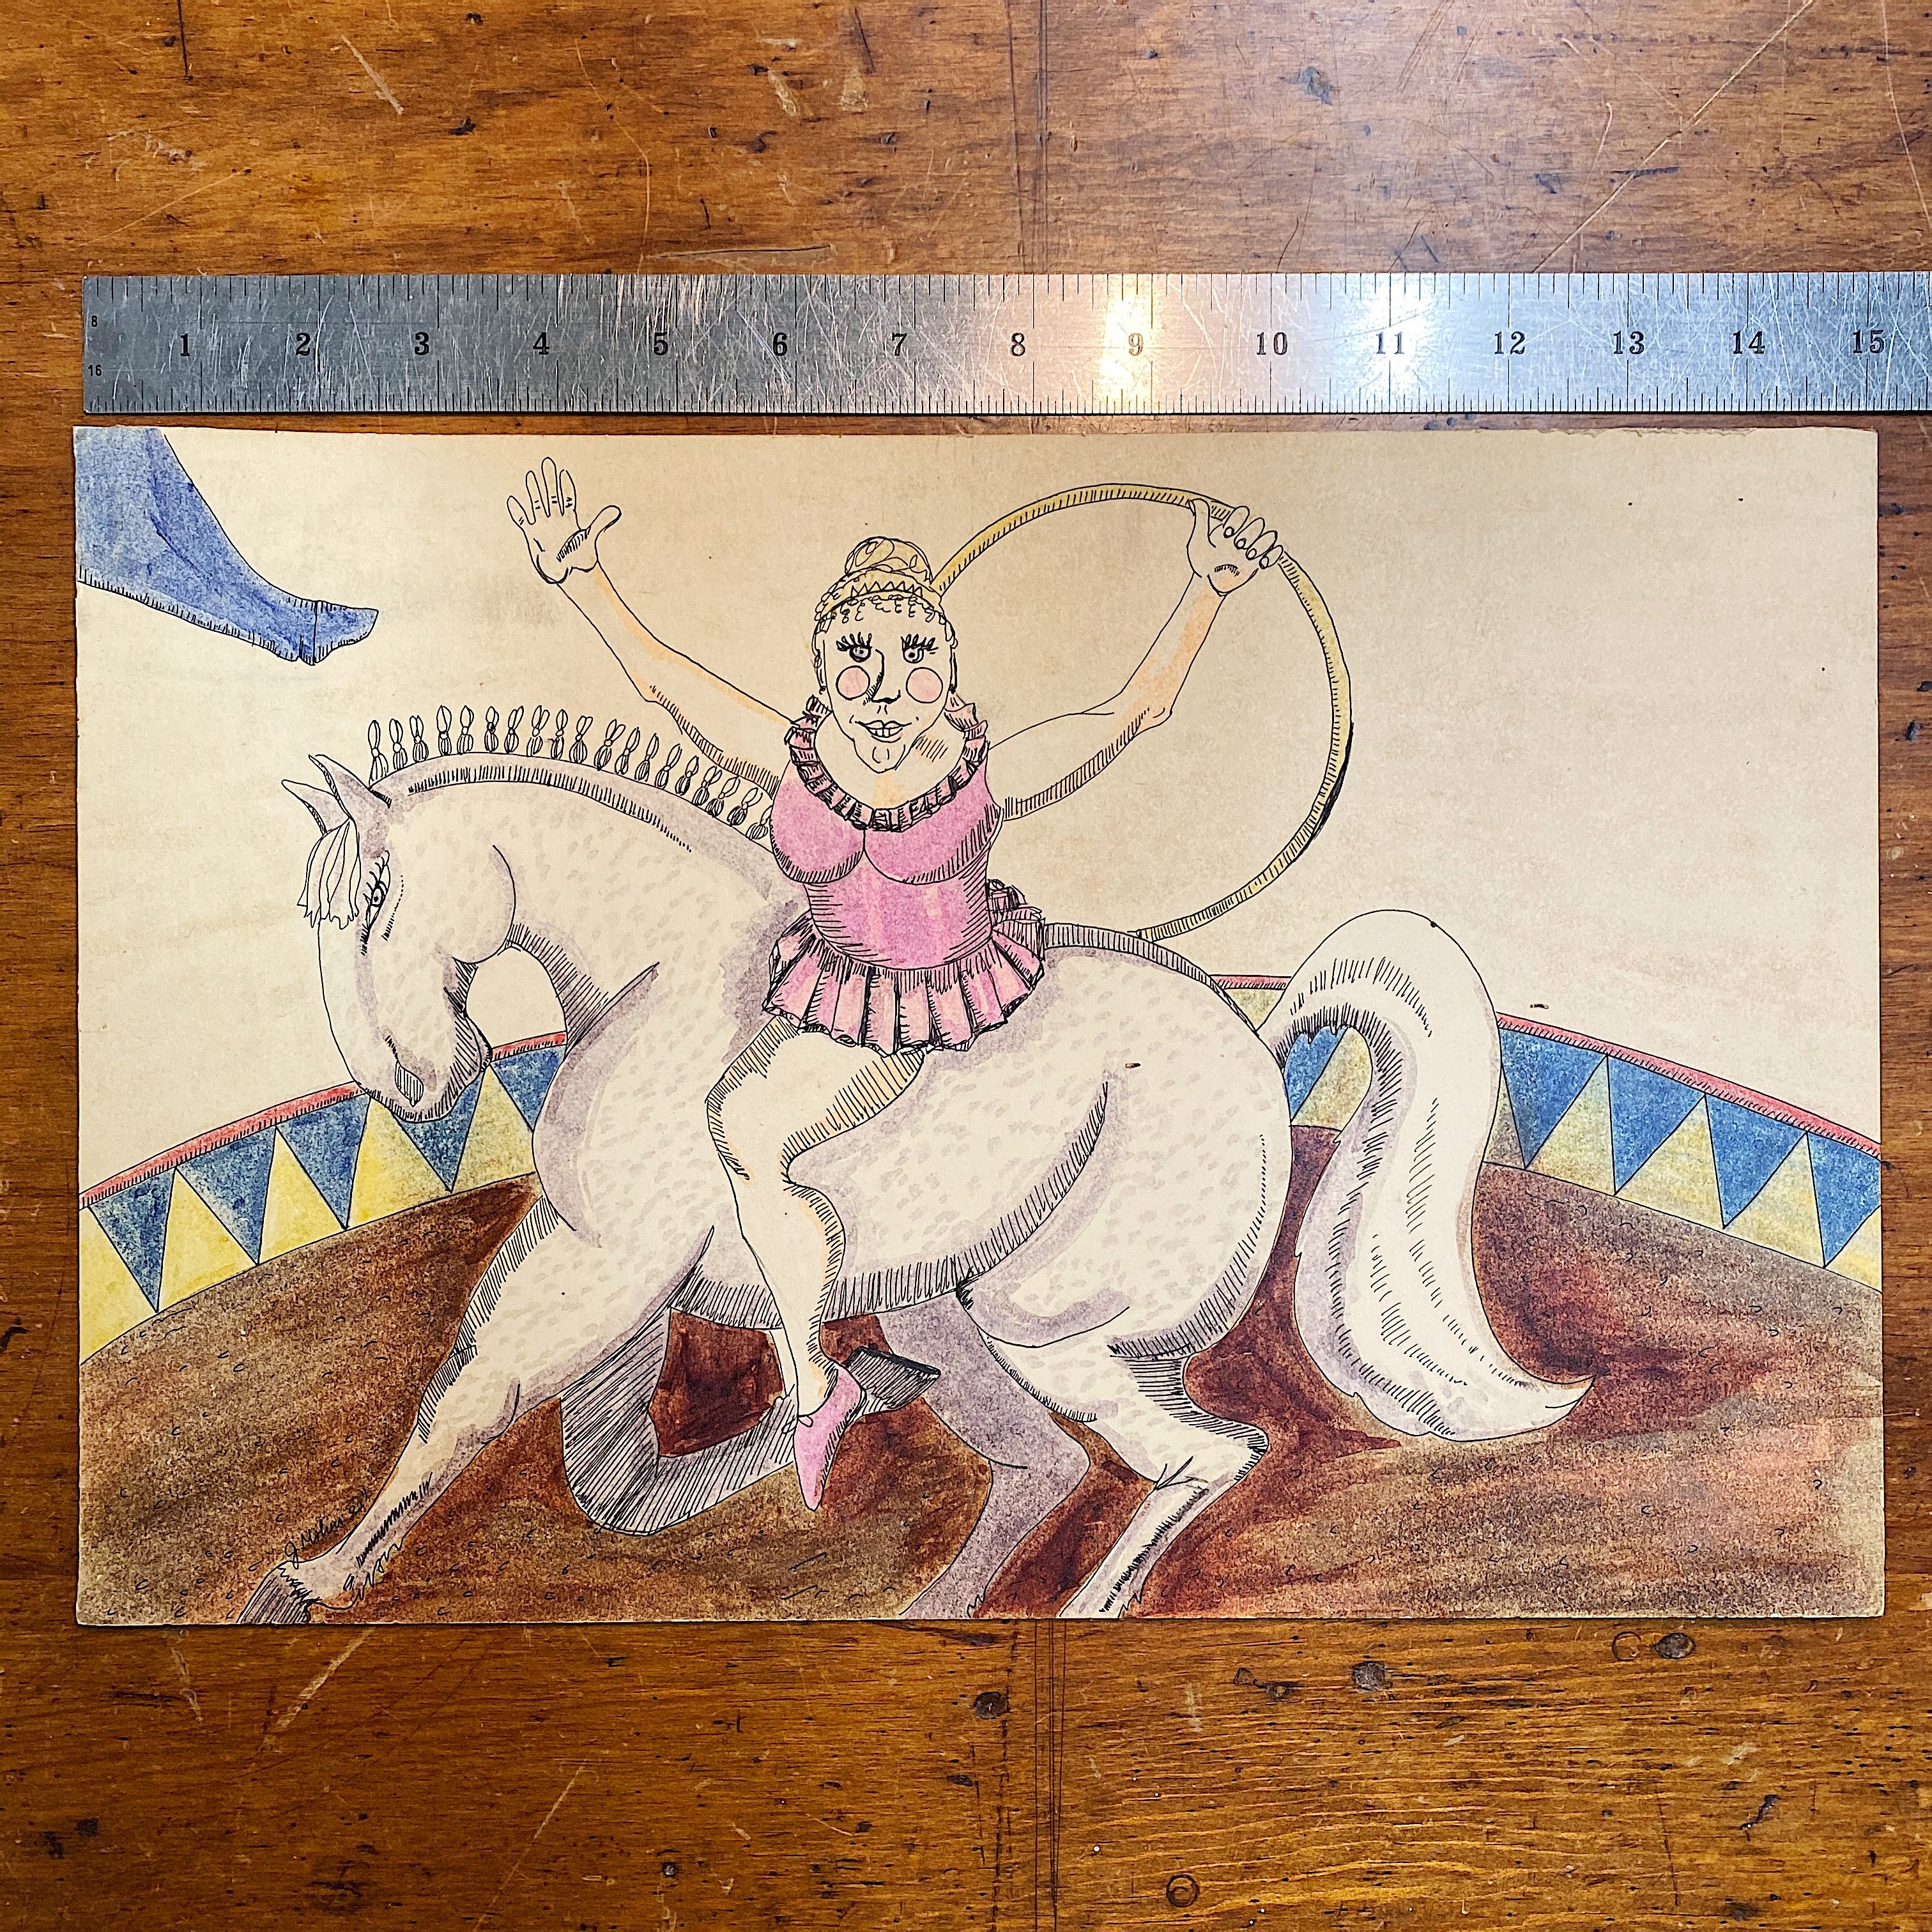 Outsider Art  of Circus Act from 1980s | Weird Artwork Signed J. Mohni